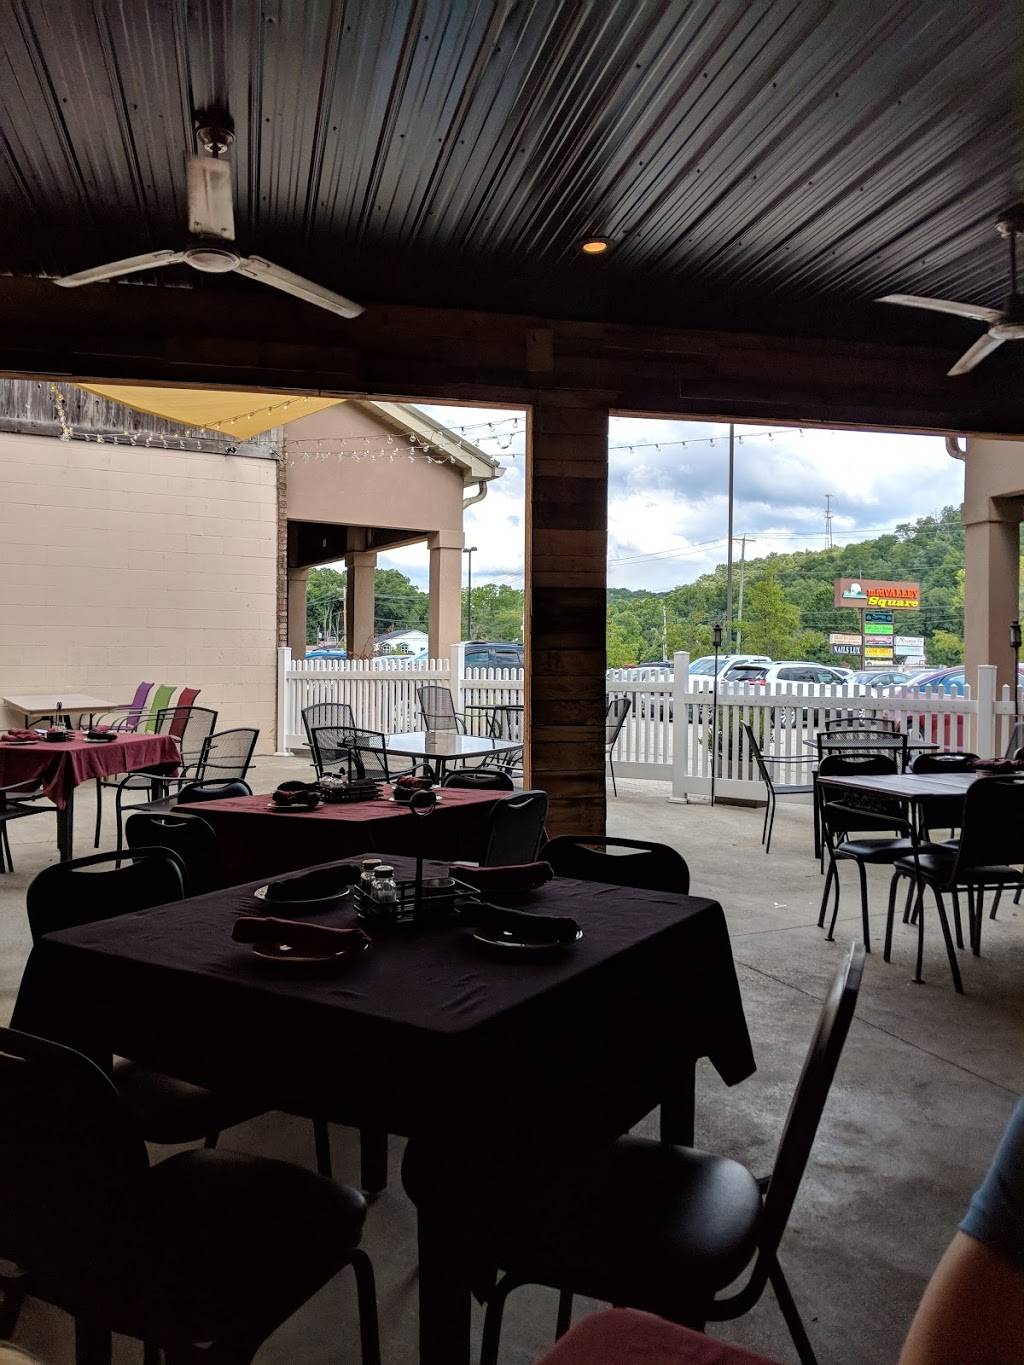 Mountain Pie Company | restaurant | 3522 Teays Valley Road A, Hurricane, WV 25526, USA | 3043976249 OR +1 304-397-6249